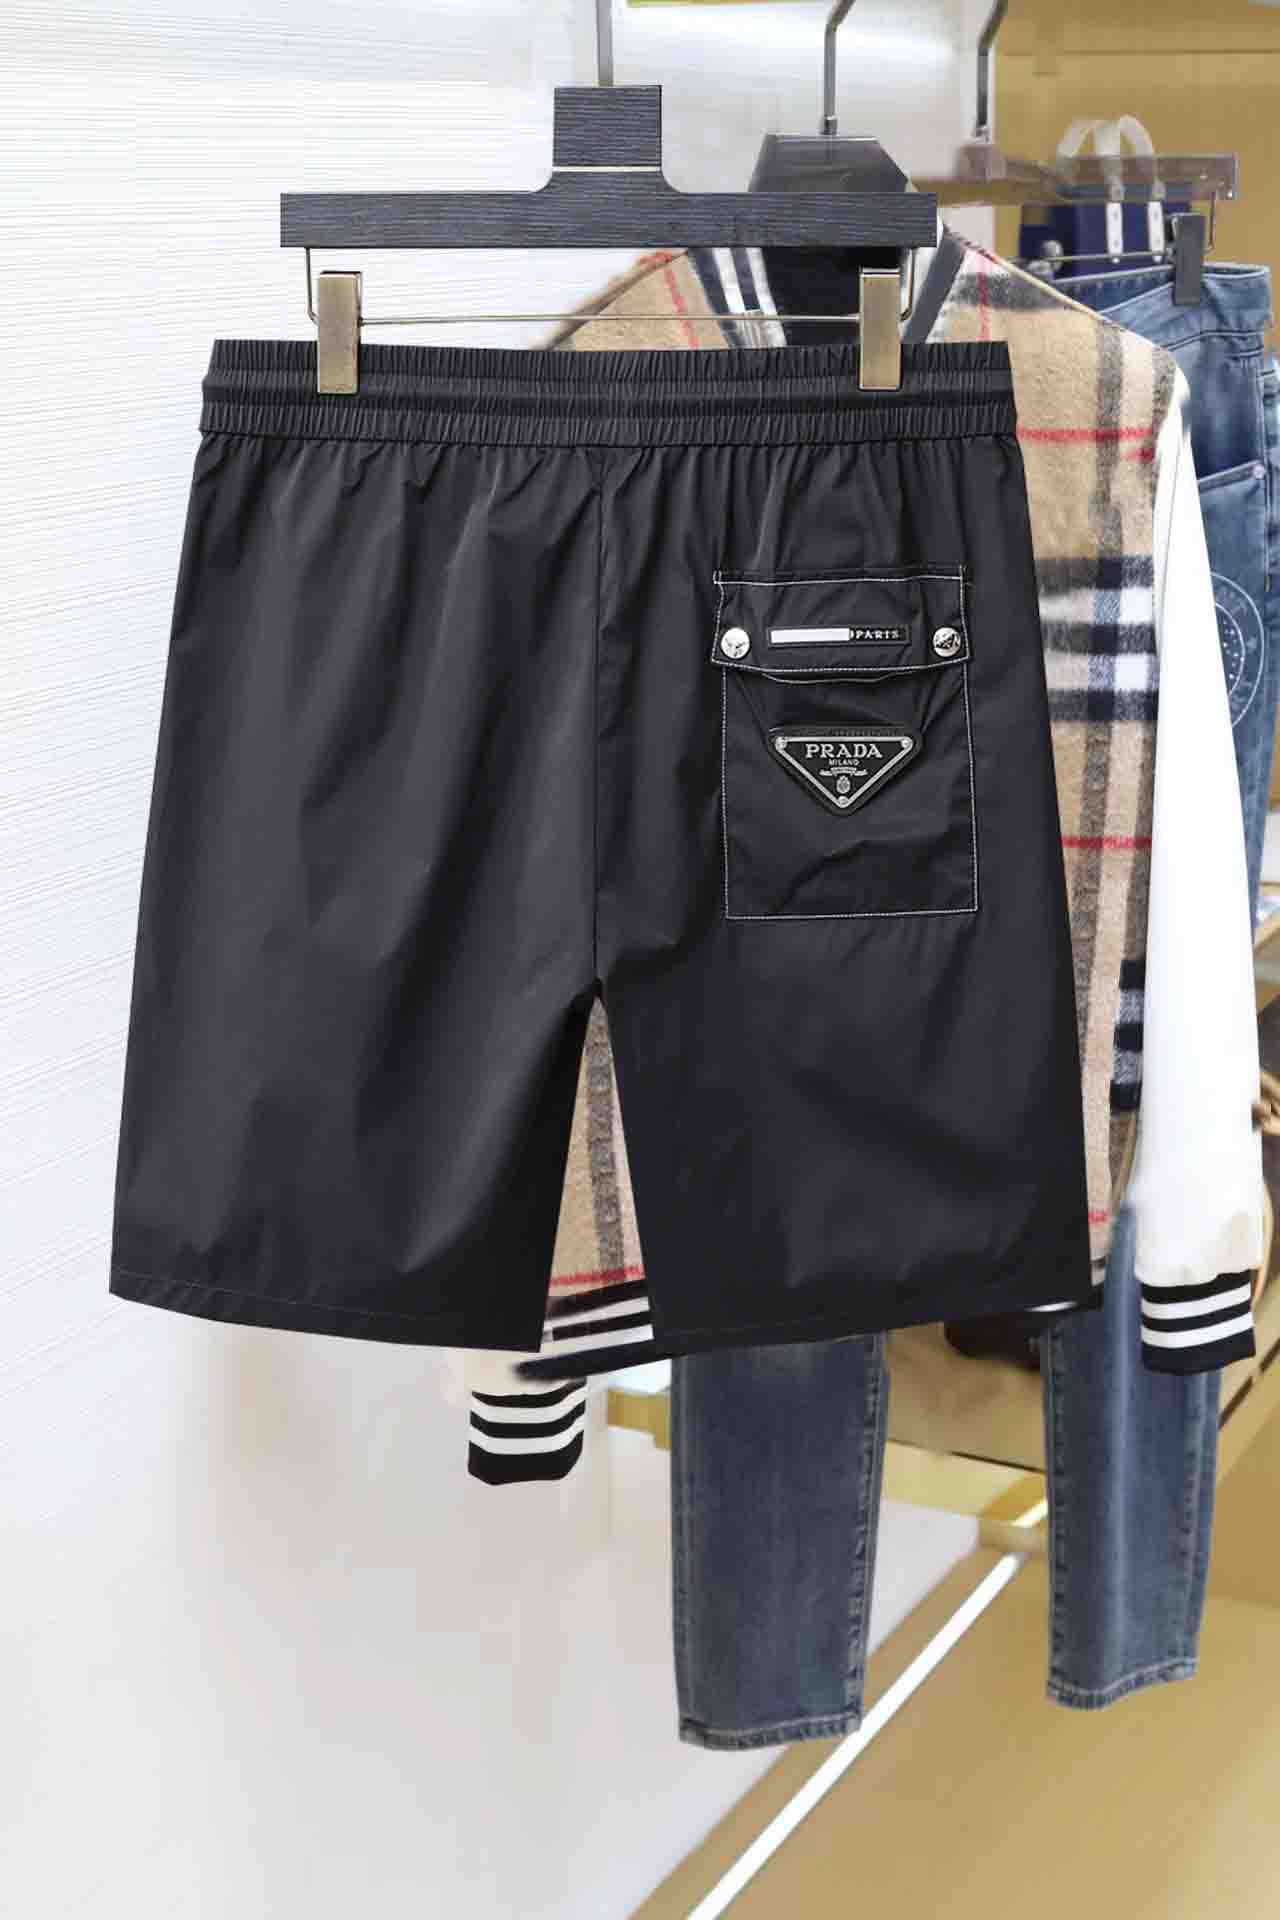 Prada Clothing Shorts High Quality Perfect
 Men Summer Collection Casual